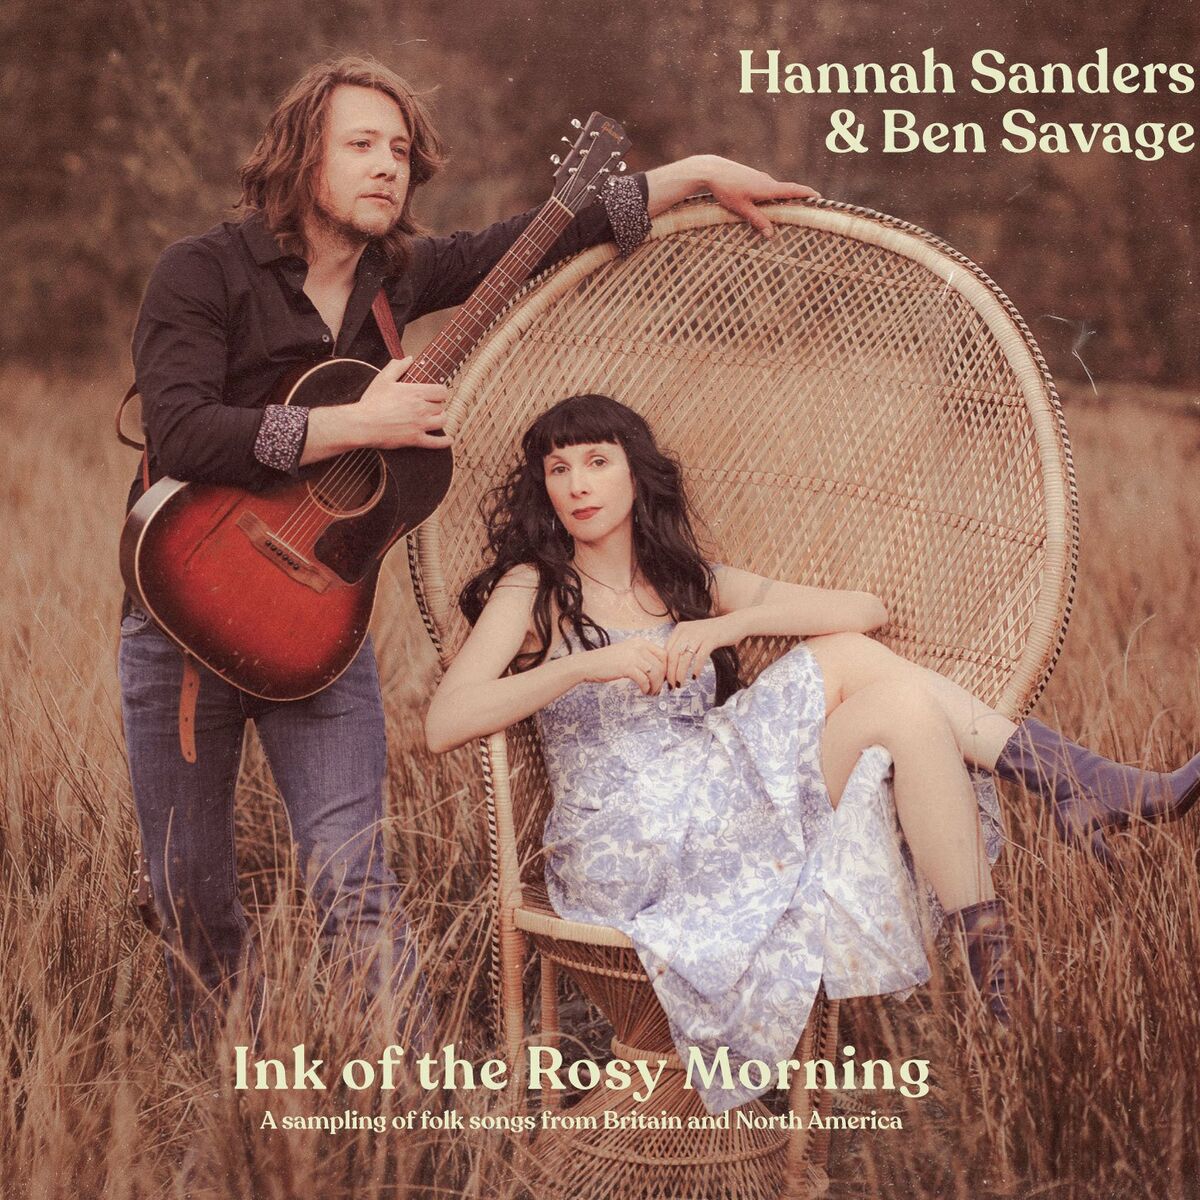 Hannah Sanders & Ben Savage - 2022 - Ink of the Rosy Morning - A Sampling of Folk Songs from Britain and North America